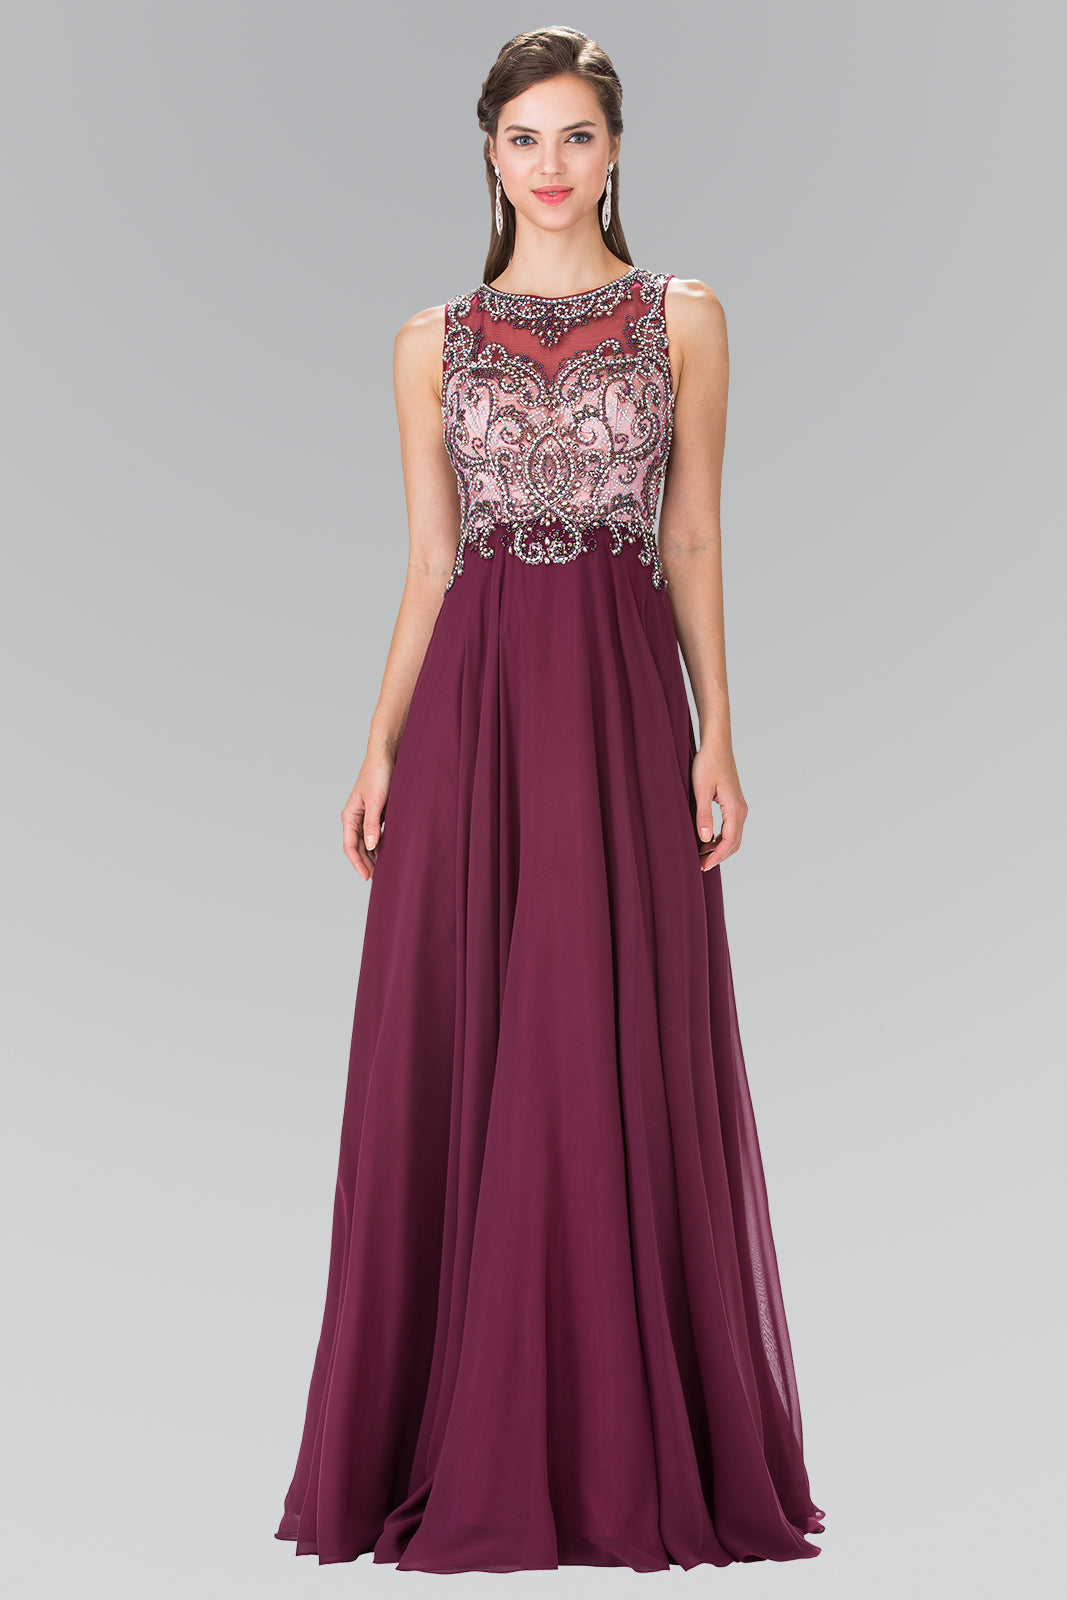 Beaded Top Chiffon Long Dress with Open Back GLGL2273 Elsy Style PROM